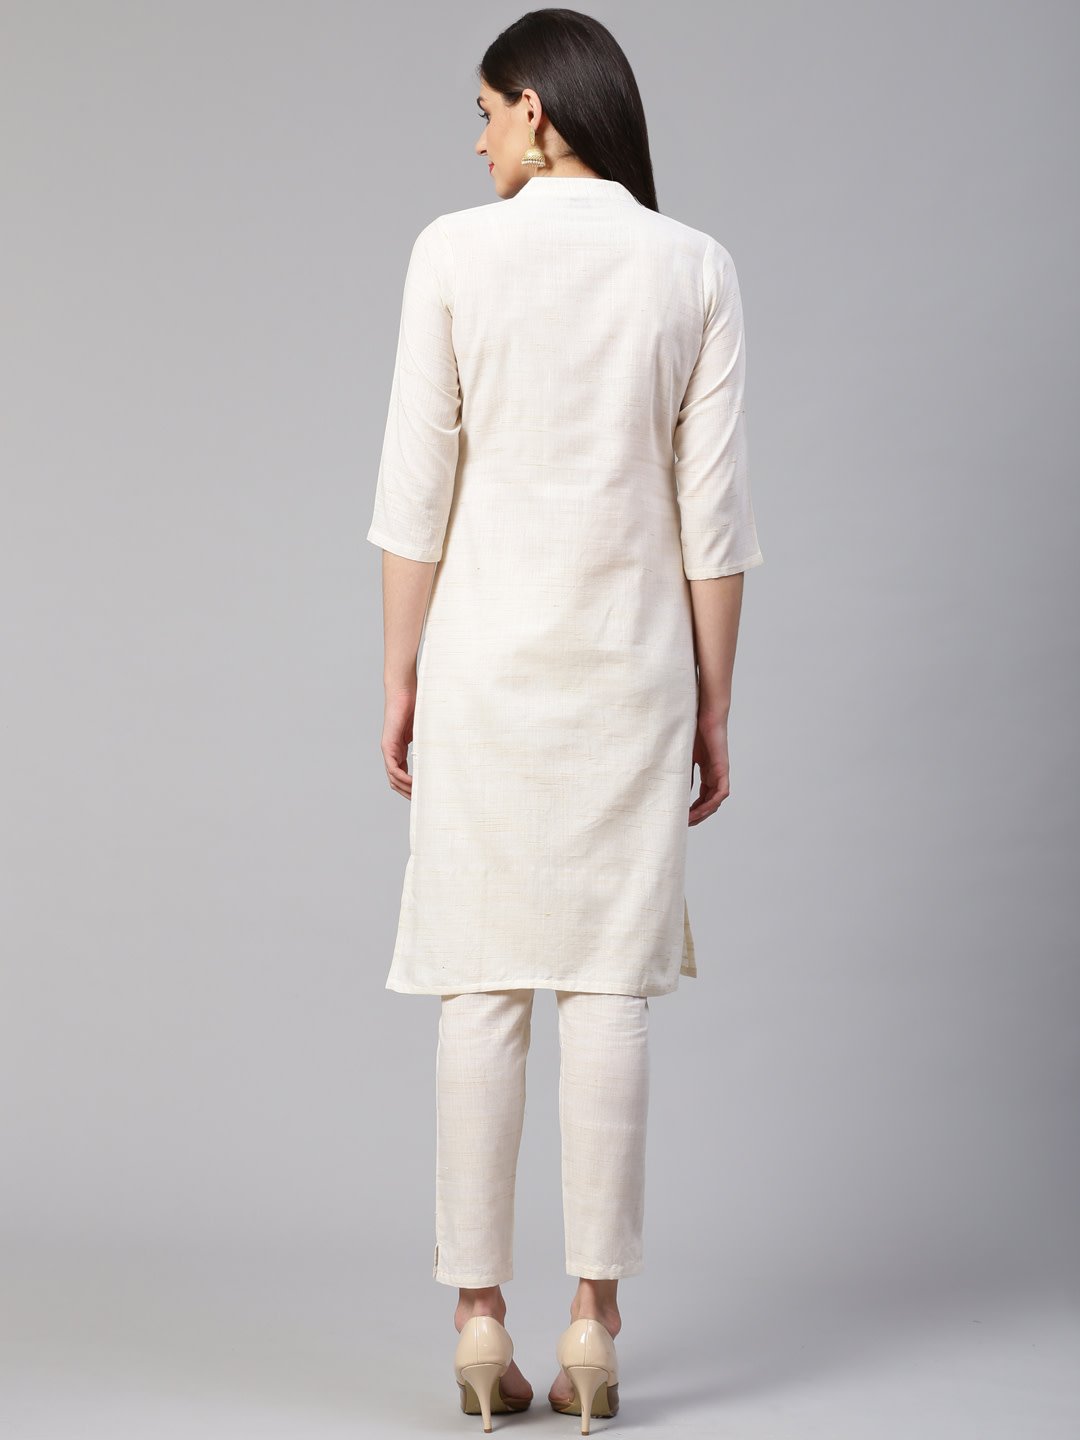 Women's Off White Woven Design Kurta with Trousers - Final Clearance Sale